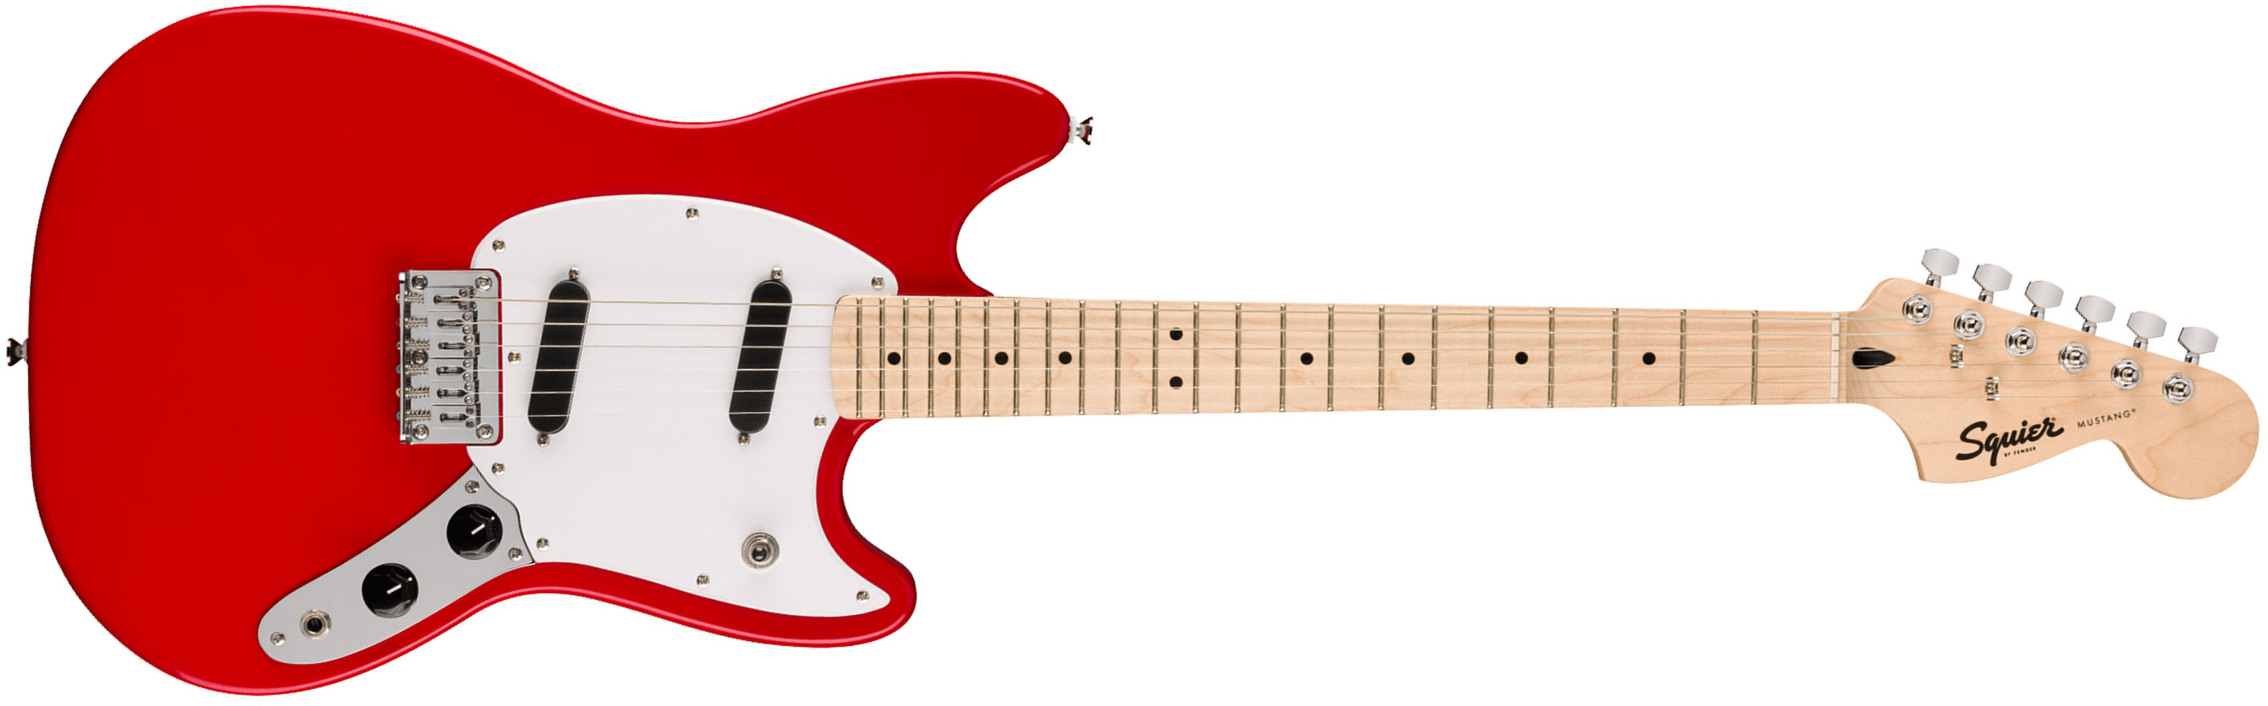 Squier Mustang Sonic 2s Ht Mn - Torino Red - Retro rock electric guitar - Main picture